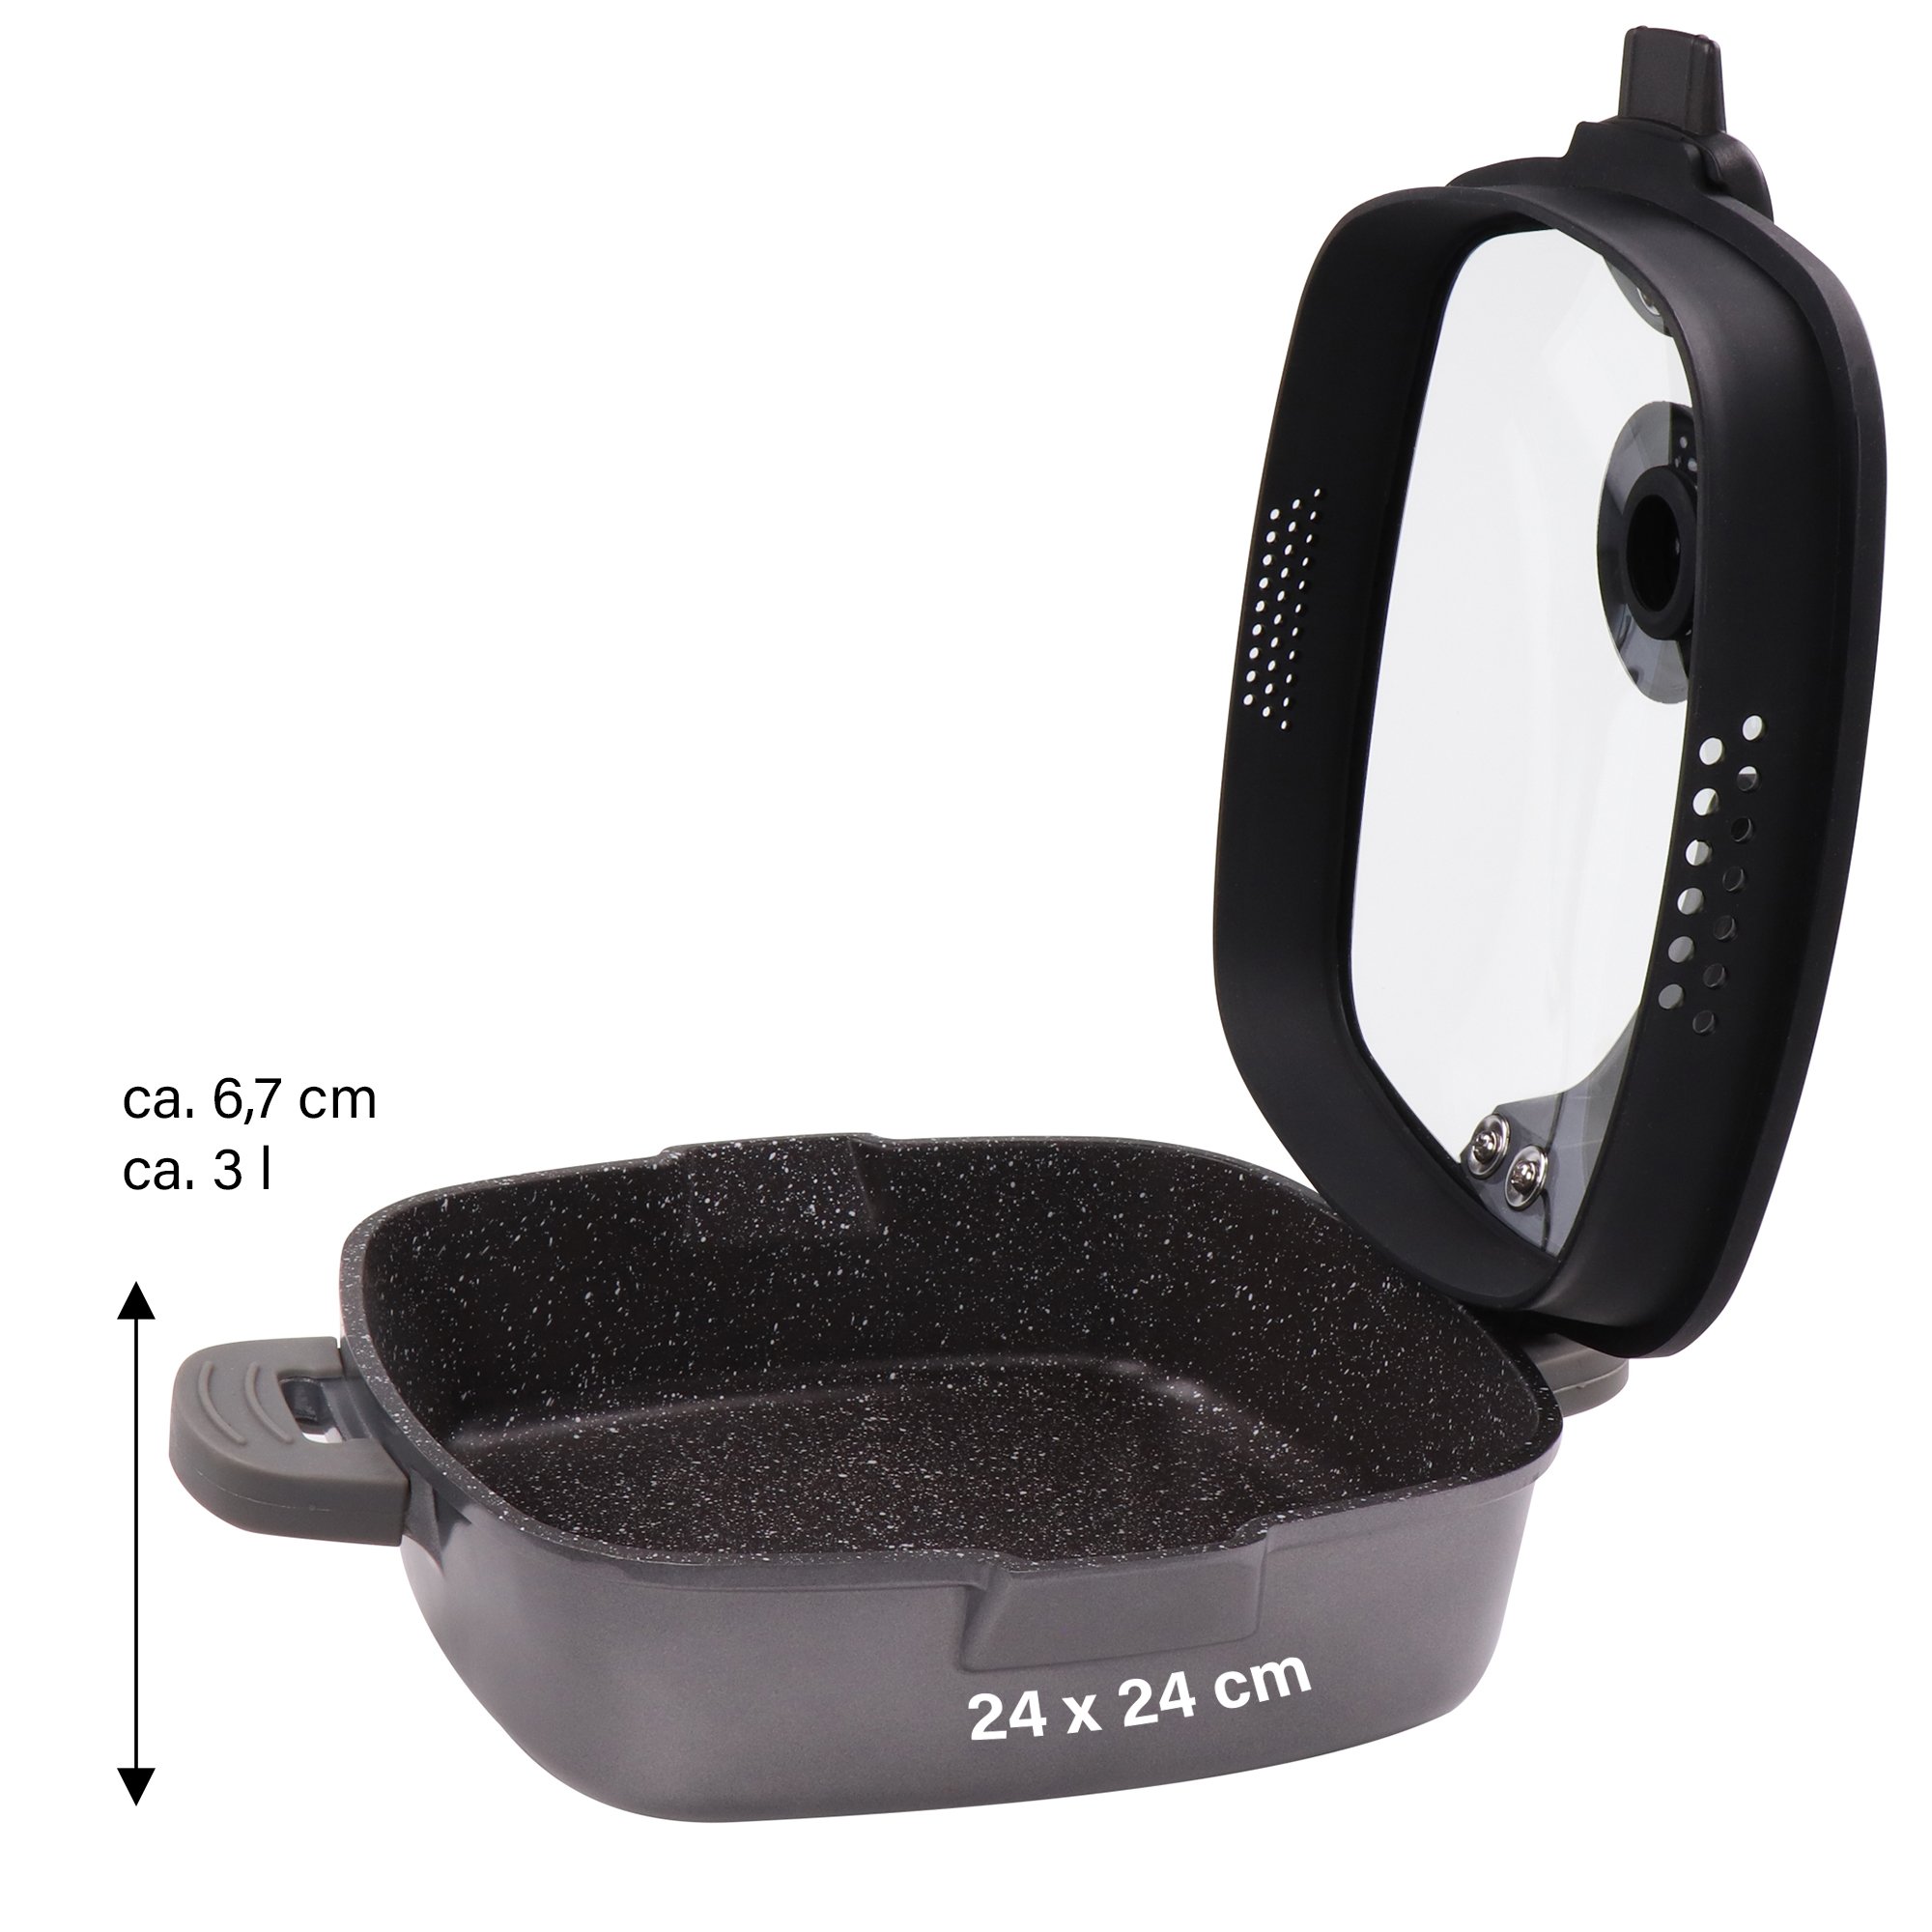 STONELINE® Square Serving Pan 24 cm, Strainer Lid, Odour & Aroma Function | SMELL WELL